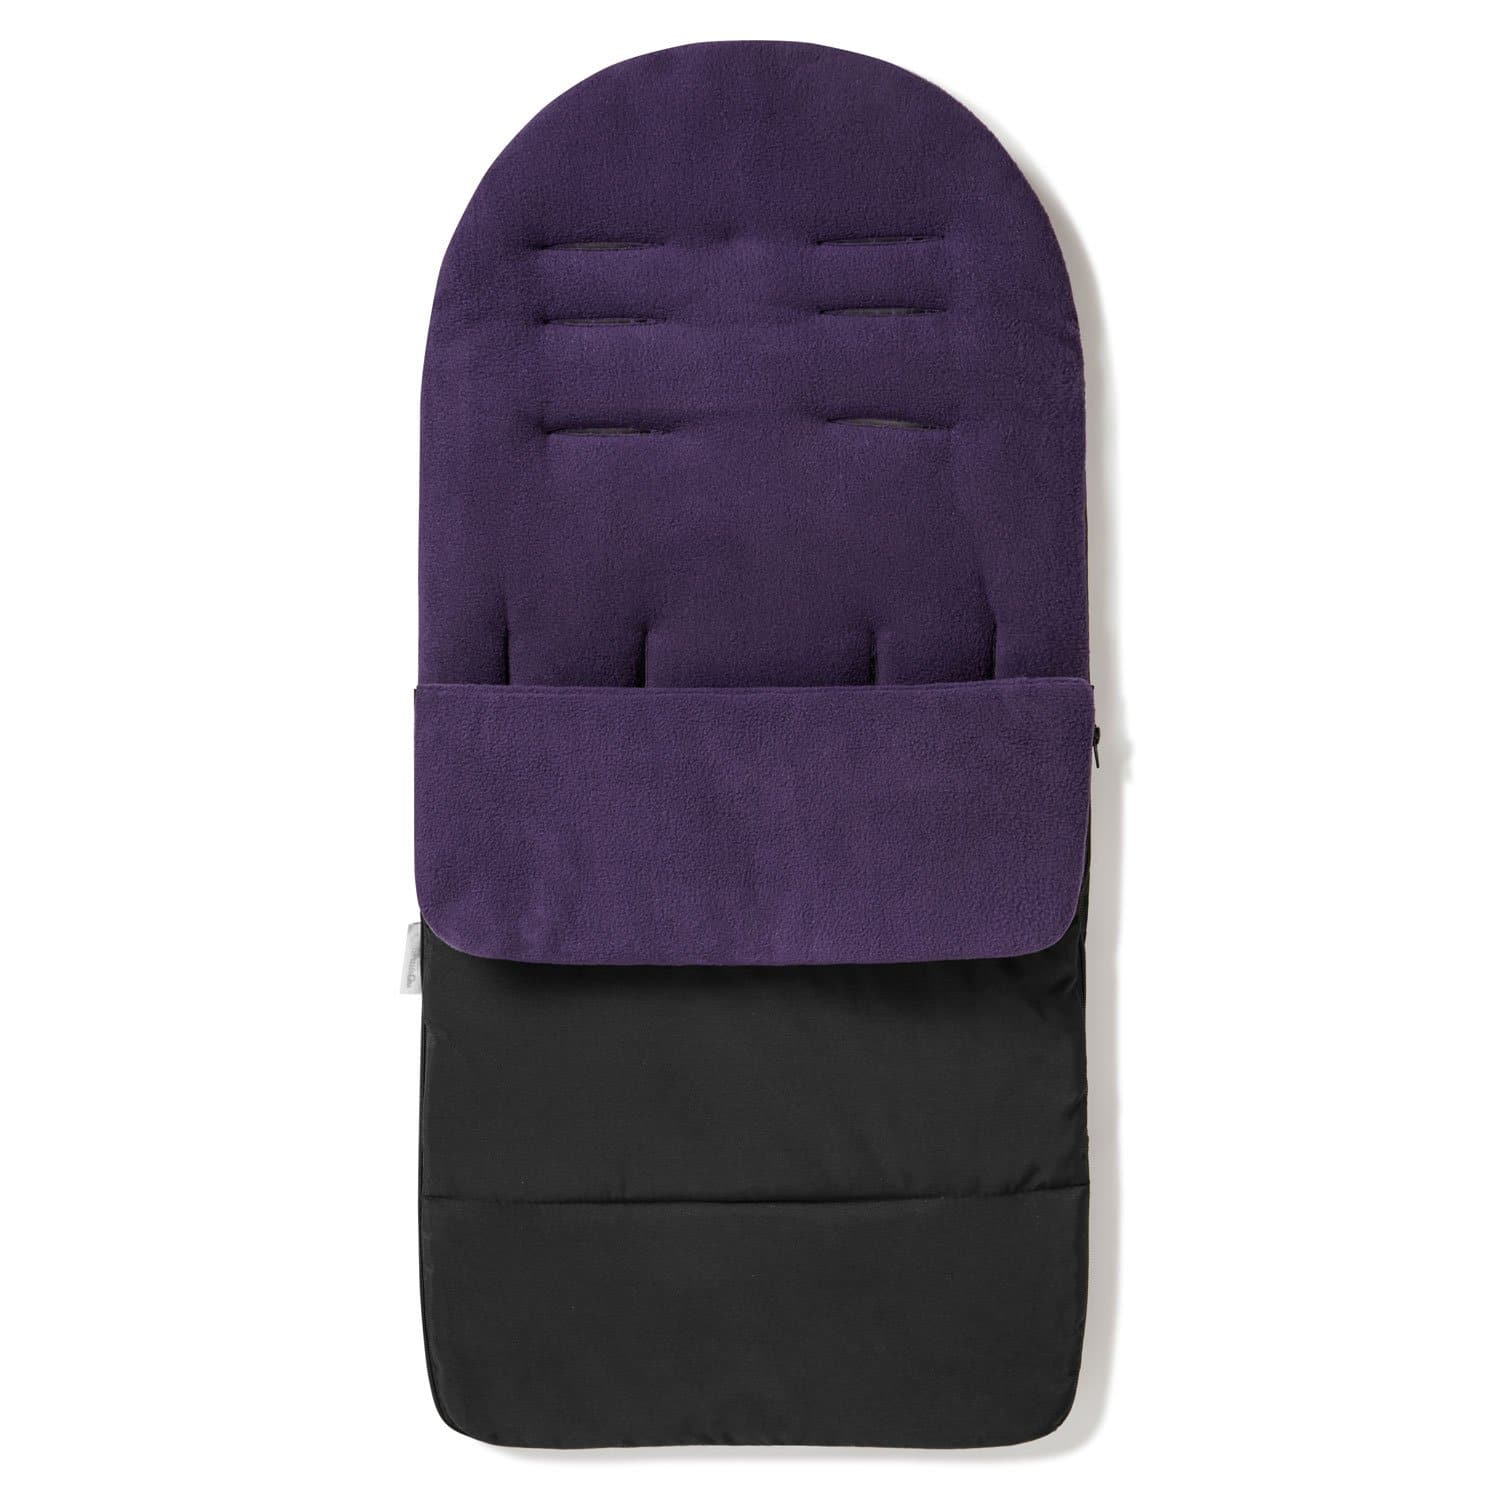 Premium Footmuff / Cosy Toes Compatible with Cosatto - Plum Purple / Fits All Models | For Your Little One